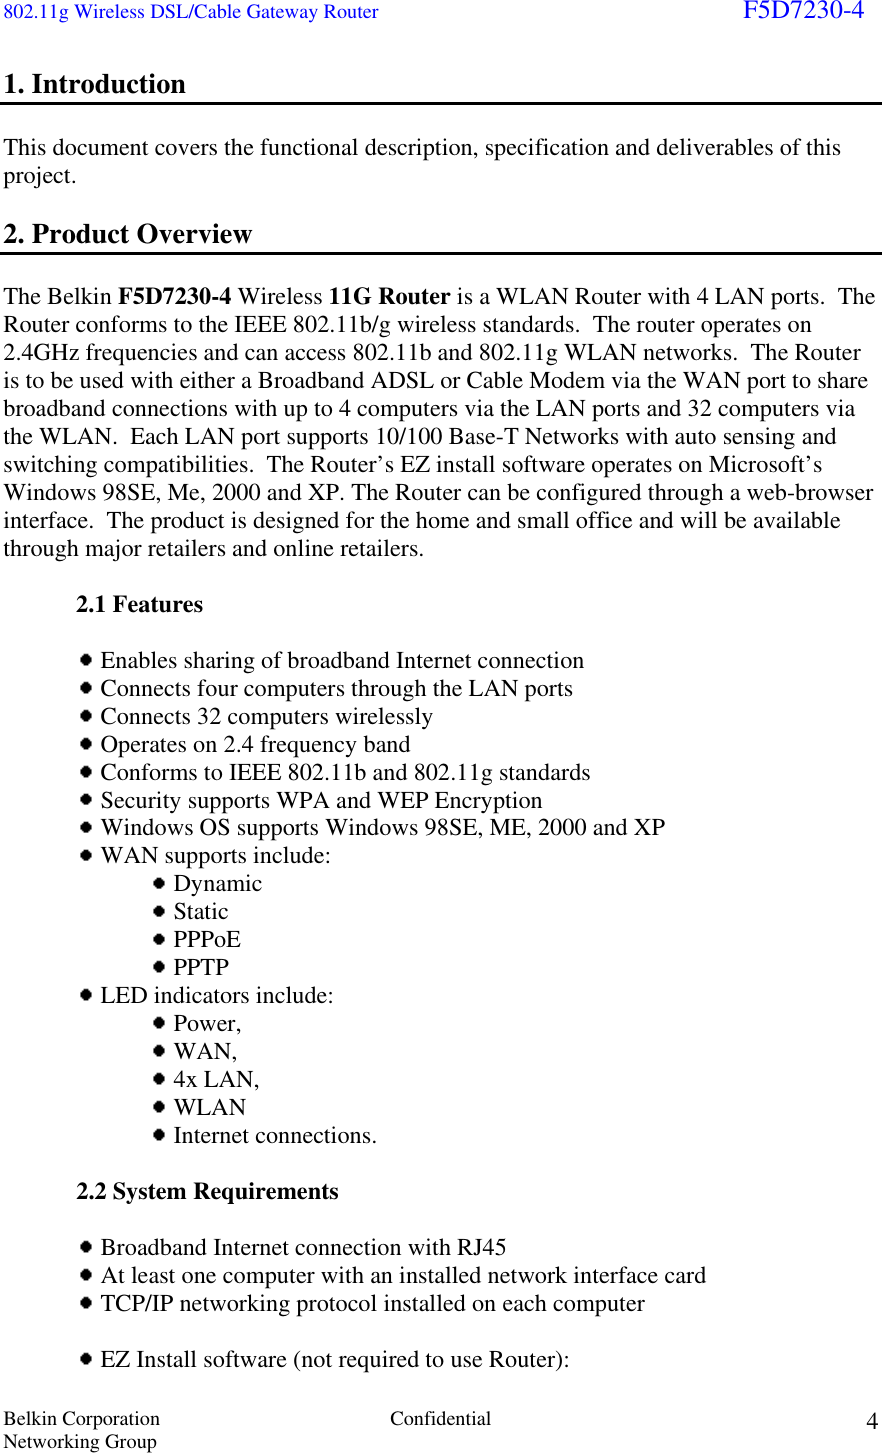 802.11g Wireless DSL/Cable Gateway Router                                                                        F5D7230-4 Belkin Corporation  Confidential Networking Group 41. Introduction  This document covers the functional description, specification and deliverables of this project.  2. Product Overview   The Belkin F5D7230-4 Wireless 11G Router is a WLAN Router with 4 LAN ports.  The Router conforms to the IEEE 802.11b/g wireless standards.  The router operates on 2.4GHz frequencies and can access 802.11b and 802.11g WLAN networks.  The Router is to be used with either a Broadband ADSL or Cable Modem via the WAN port to share broadband connections with up to 4 computers via the LAN ports and 32 computers via the WLAN.  Each LAN port supports 10/100 Base-T Networks with auto sensing and switching compatibilities.  The Router’s EZ install software operates on Microsoft’s Windows 98SE, Me, 2000 and XP. The Router can be configured through a web-browser interface.  The product is designed for the home and small office and will be available through major retailers and online retailers.  2.1 Features    Enables sharing of broadband Internet connection   Connects four computers through the LAN ports    Connects 32 computers wirelessly   Operates on 2.4 frequency band   Conforms to IEEE 802.11b and 802.11g standards   Security supports WPA and WEP Encryption   Windows OS supports Windows 98SE, ME, 2000 and XP   WAN supports include:     Dynamic     Static     PPPoE     PPTP   LED indicators include:     Power,      WAN,      4x LAN,      WLAN      Internet connections.   2.2 System Requirements    Broadband Internet connection with RJ45   At least one computer with an installed network interface card   TCP/IP networking protocol installed on each computer     EZ Install software (not required to use Router):  